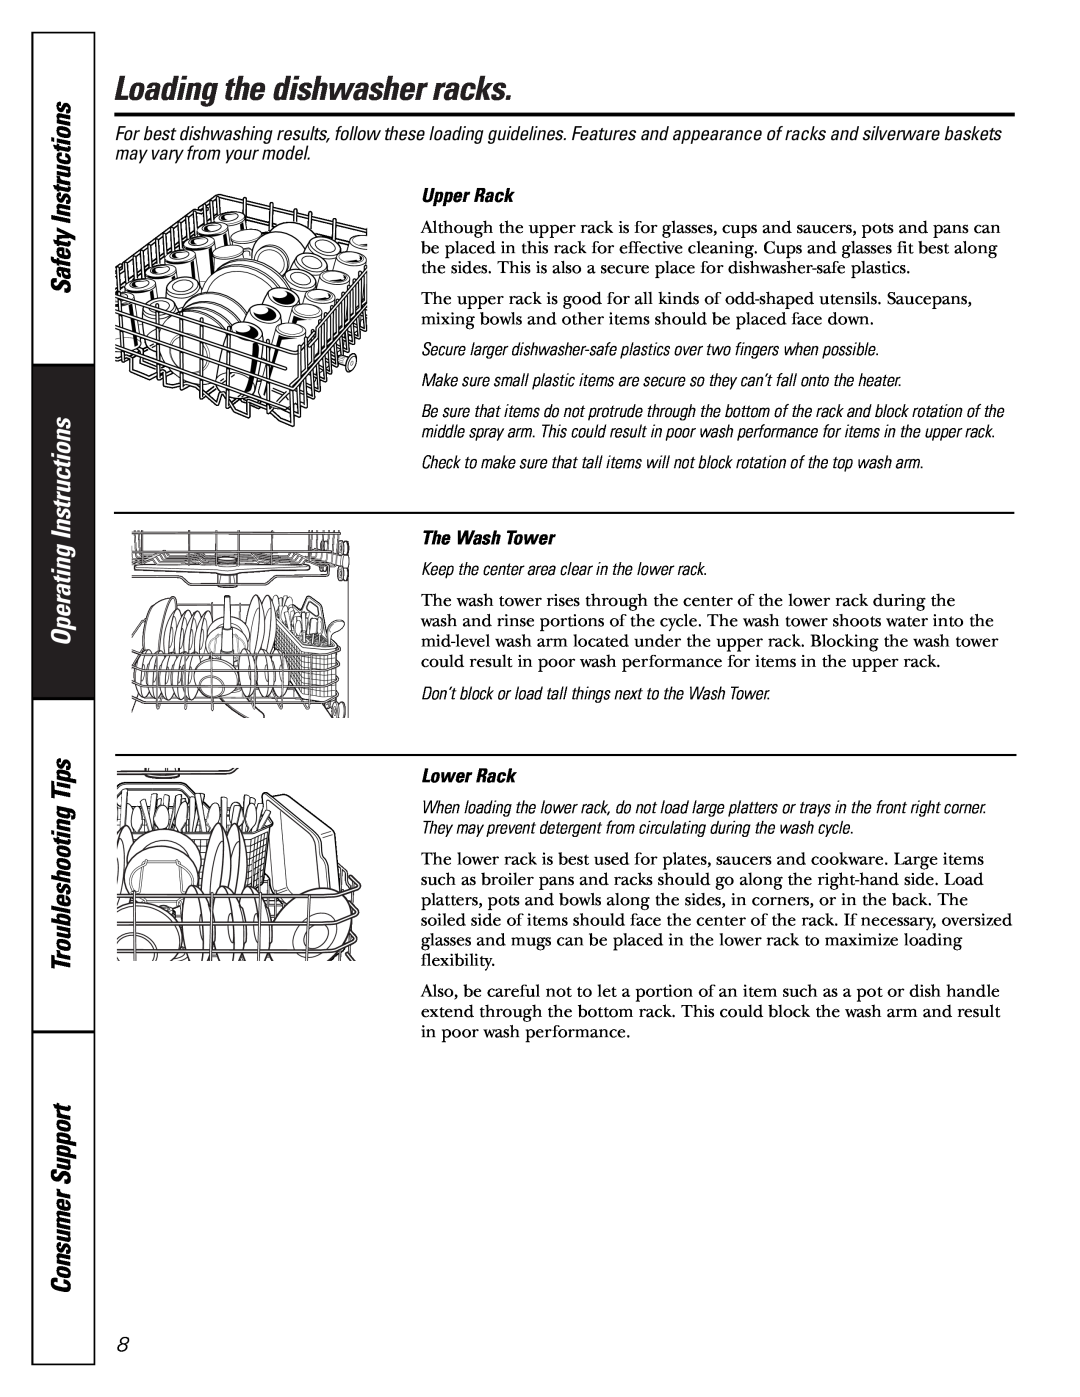 GE GSD 5200 owner manual Loading the dishwasher racks, Upper Rack, The Wash Tower, Lower Rack, Safety Instructions 